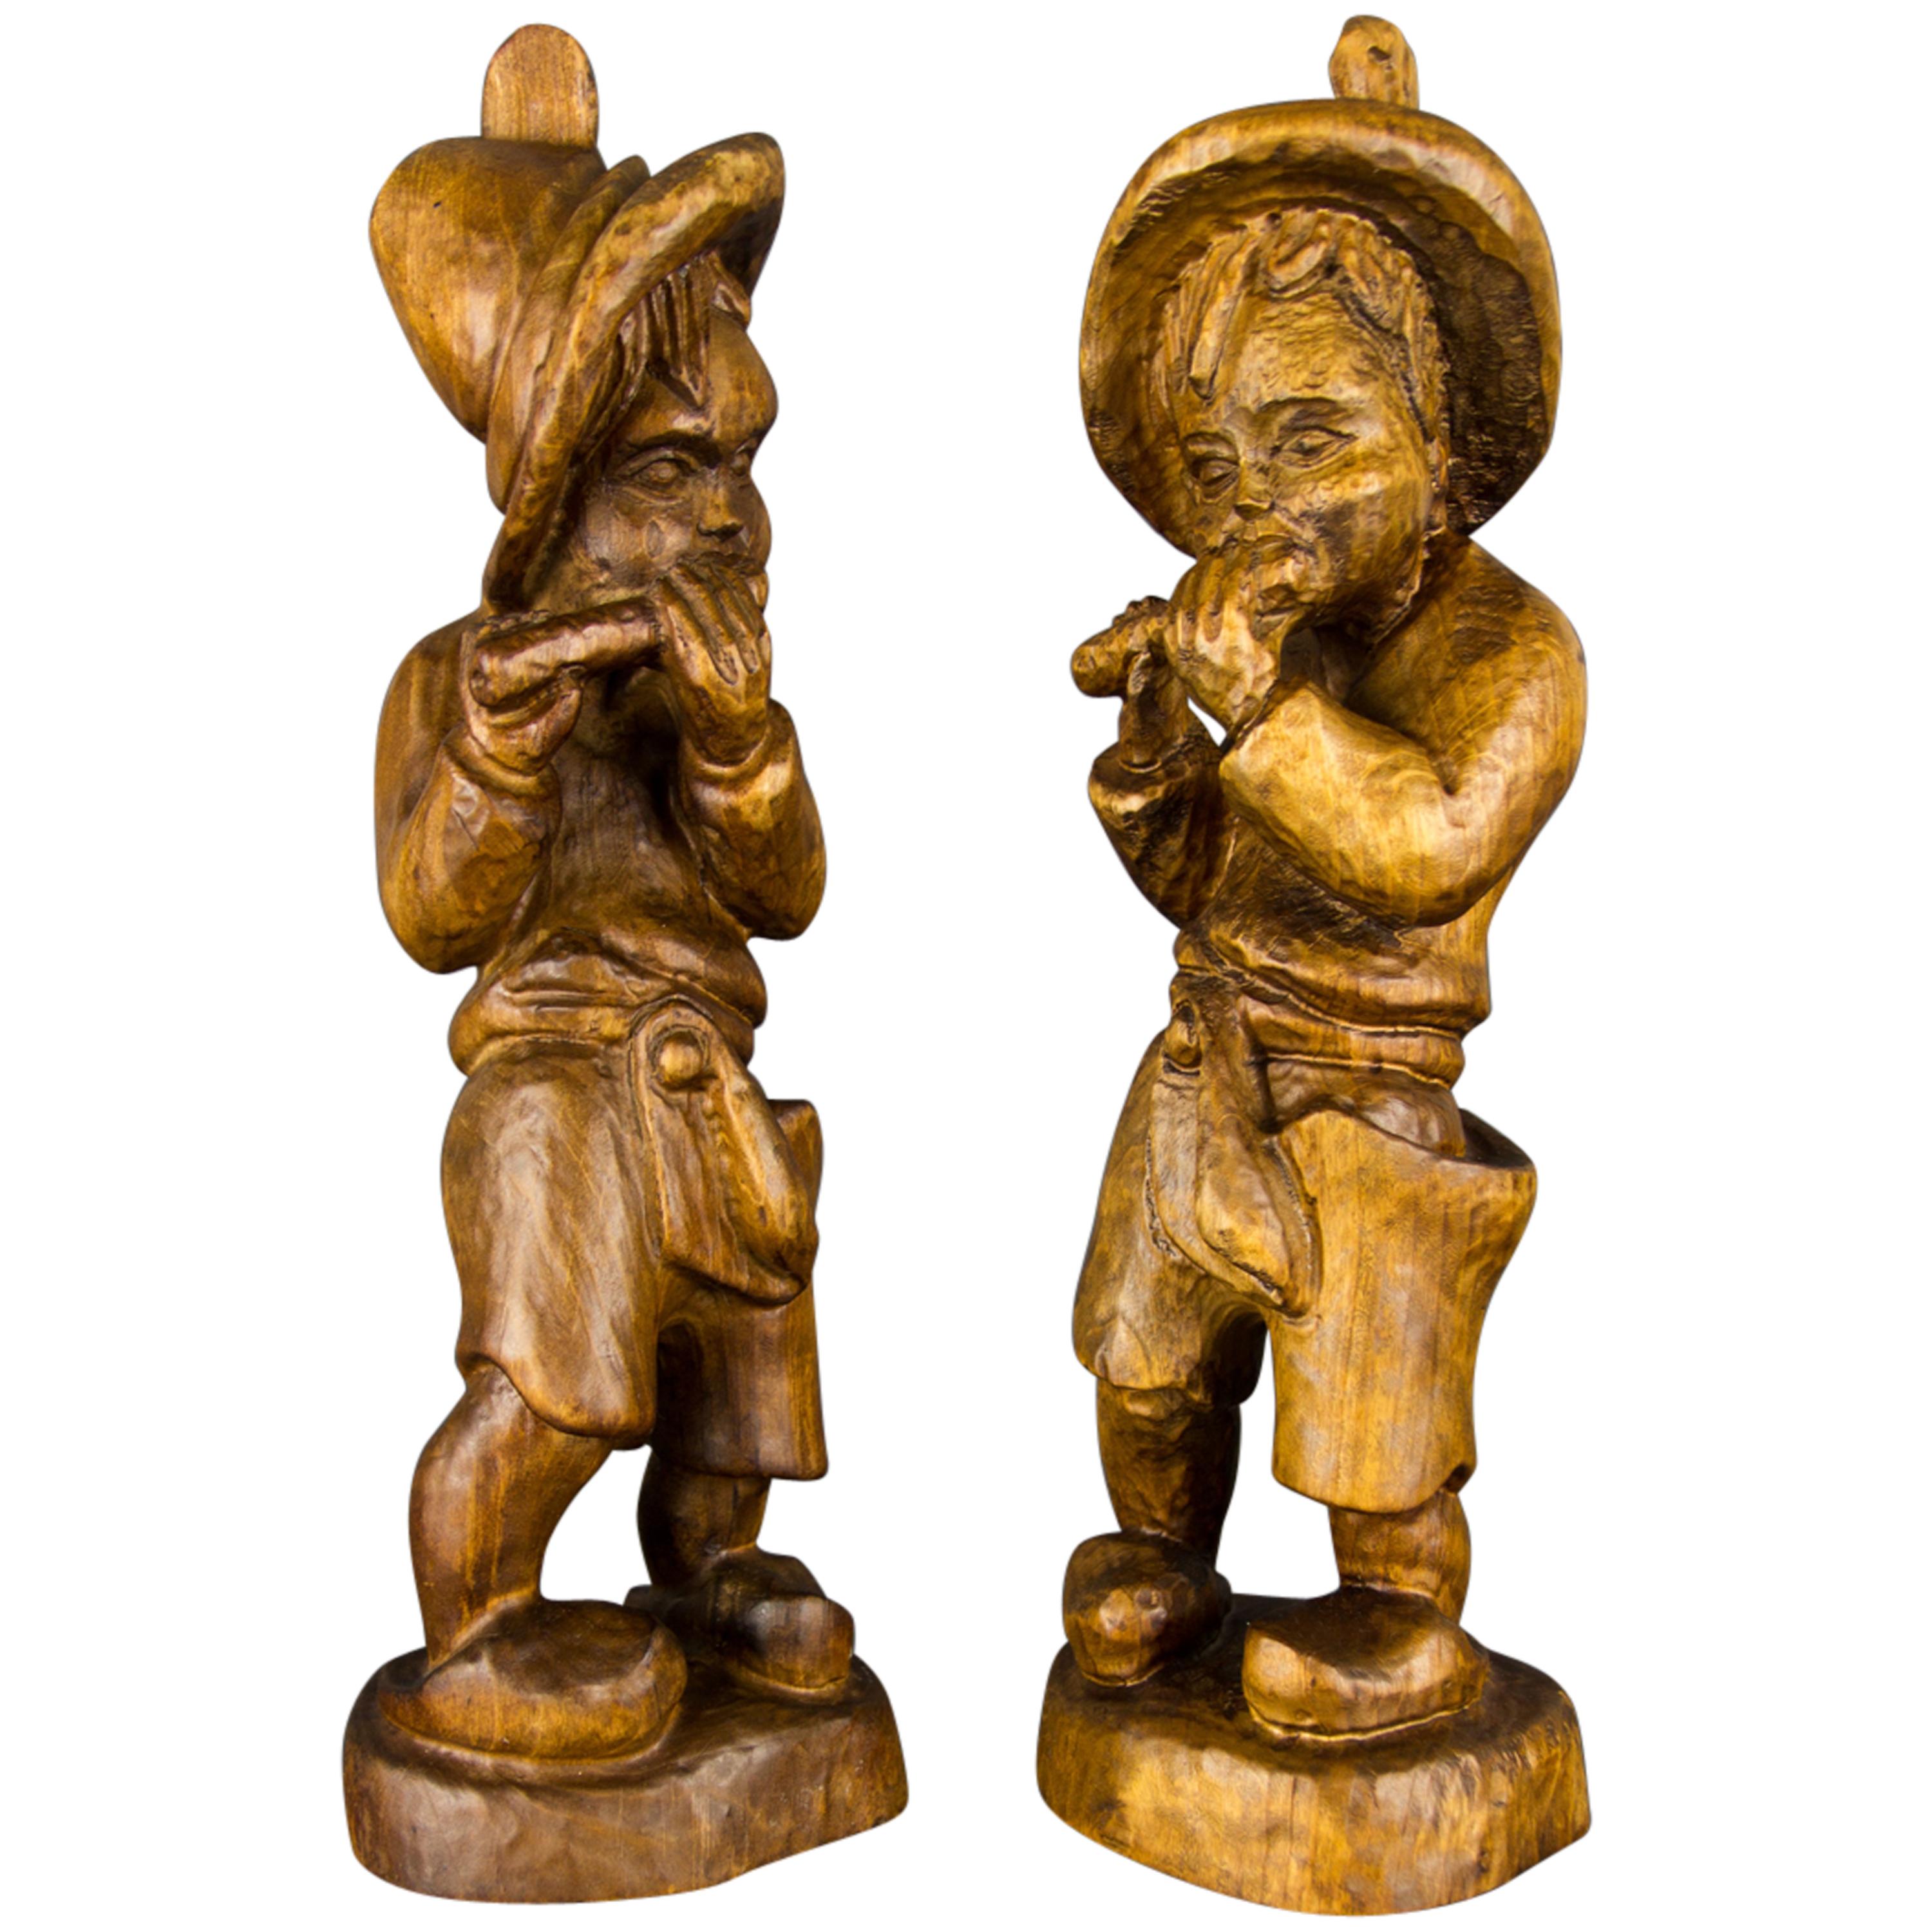 Pair of German Hand Carved Wood Figurative Sculptures of Two Boys Musicians